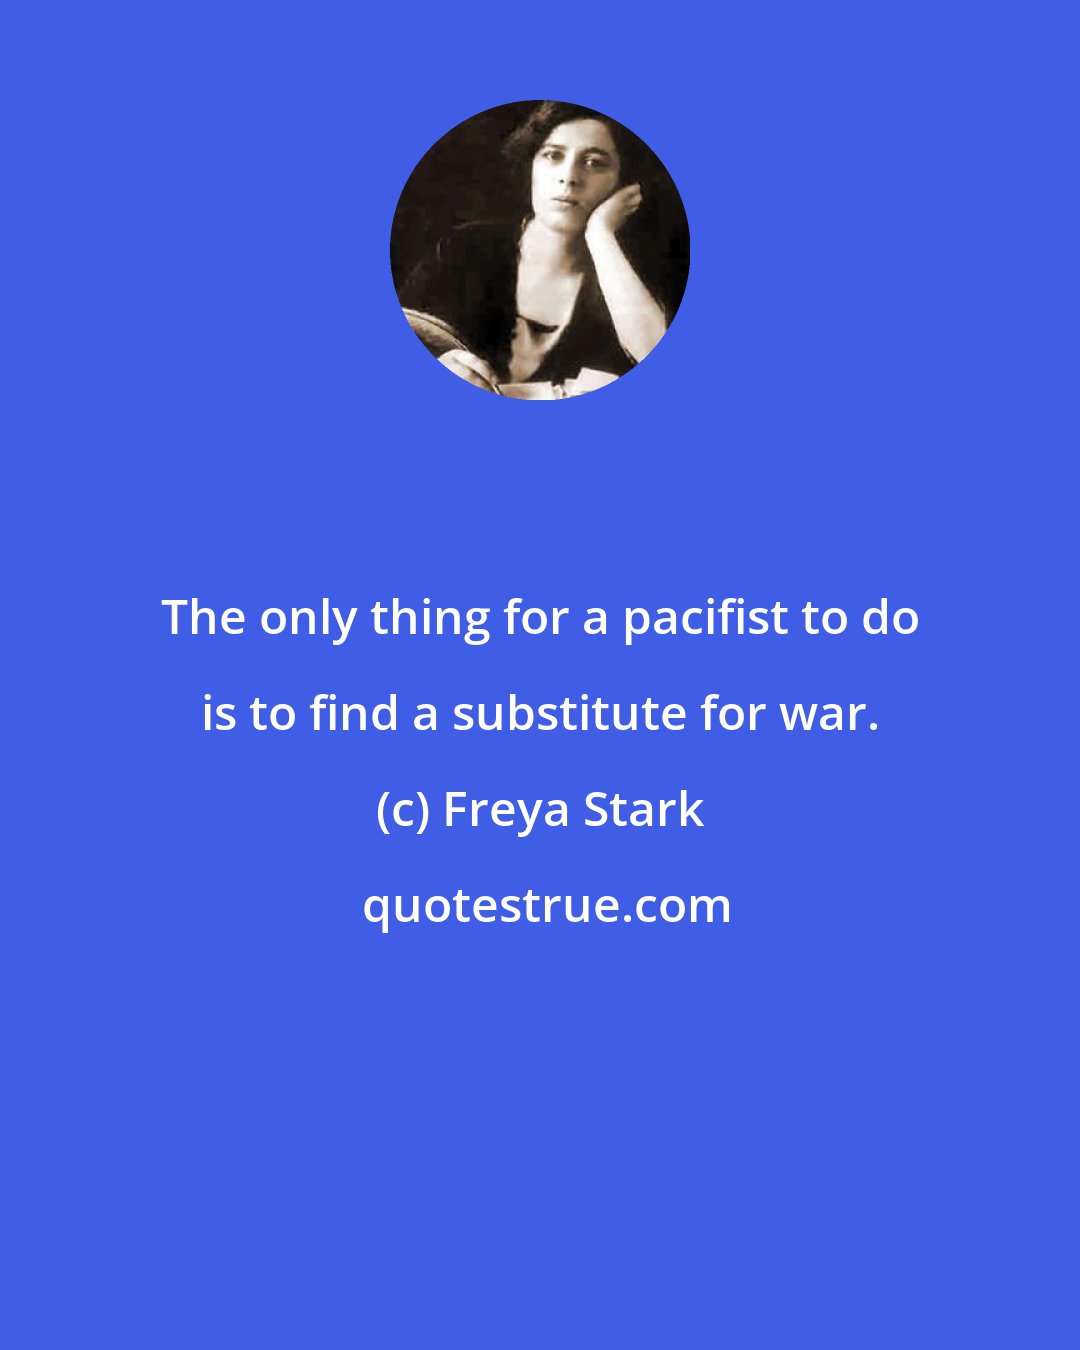 Freya Stark: The only thing for a pacifist to do is to find a substitute for war.